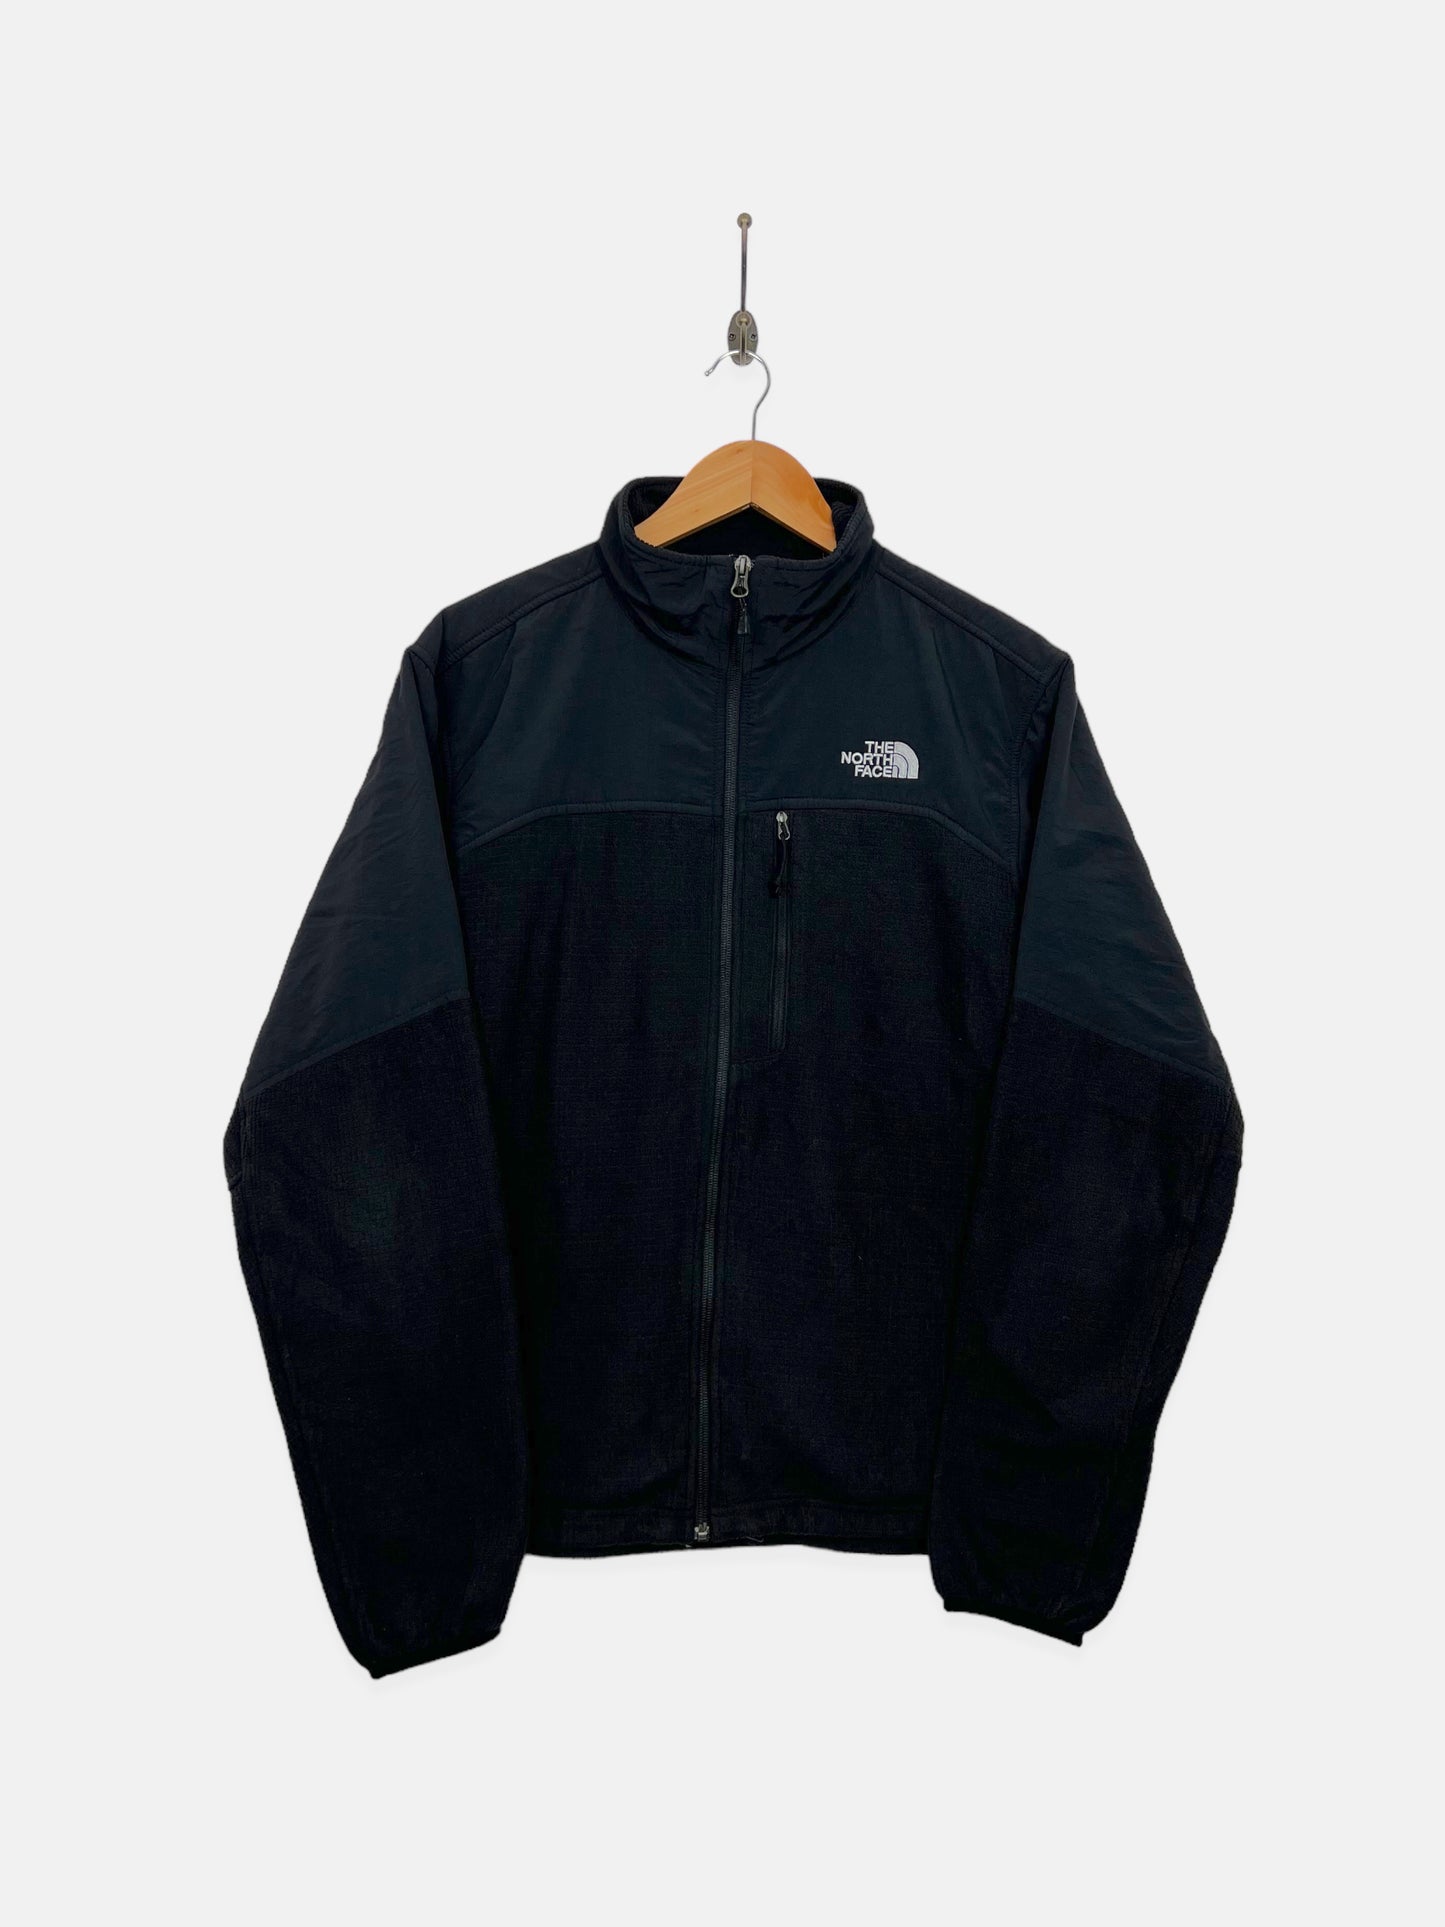 The North Face Embroidered Vintage Fleece/Jacket Size M-L